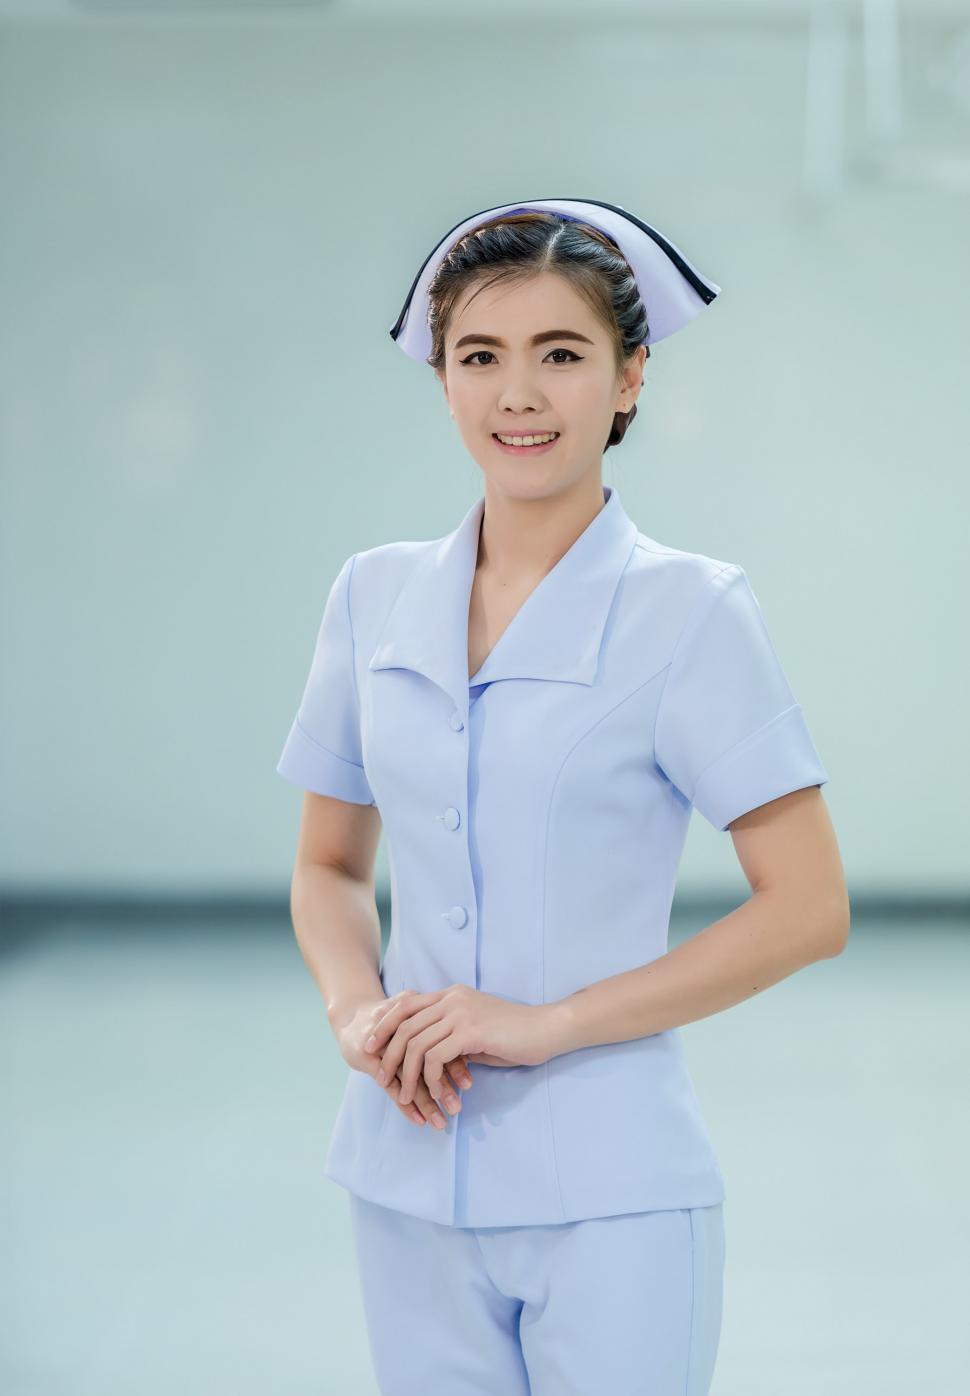 Free Image of Woman in Nurse Uniform Posing for Picture 